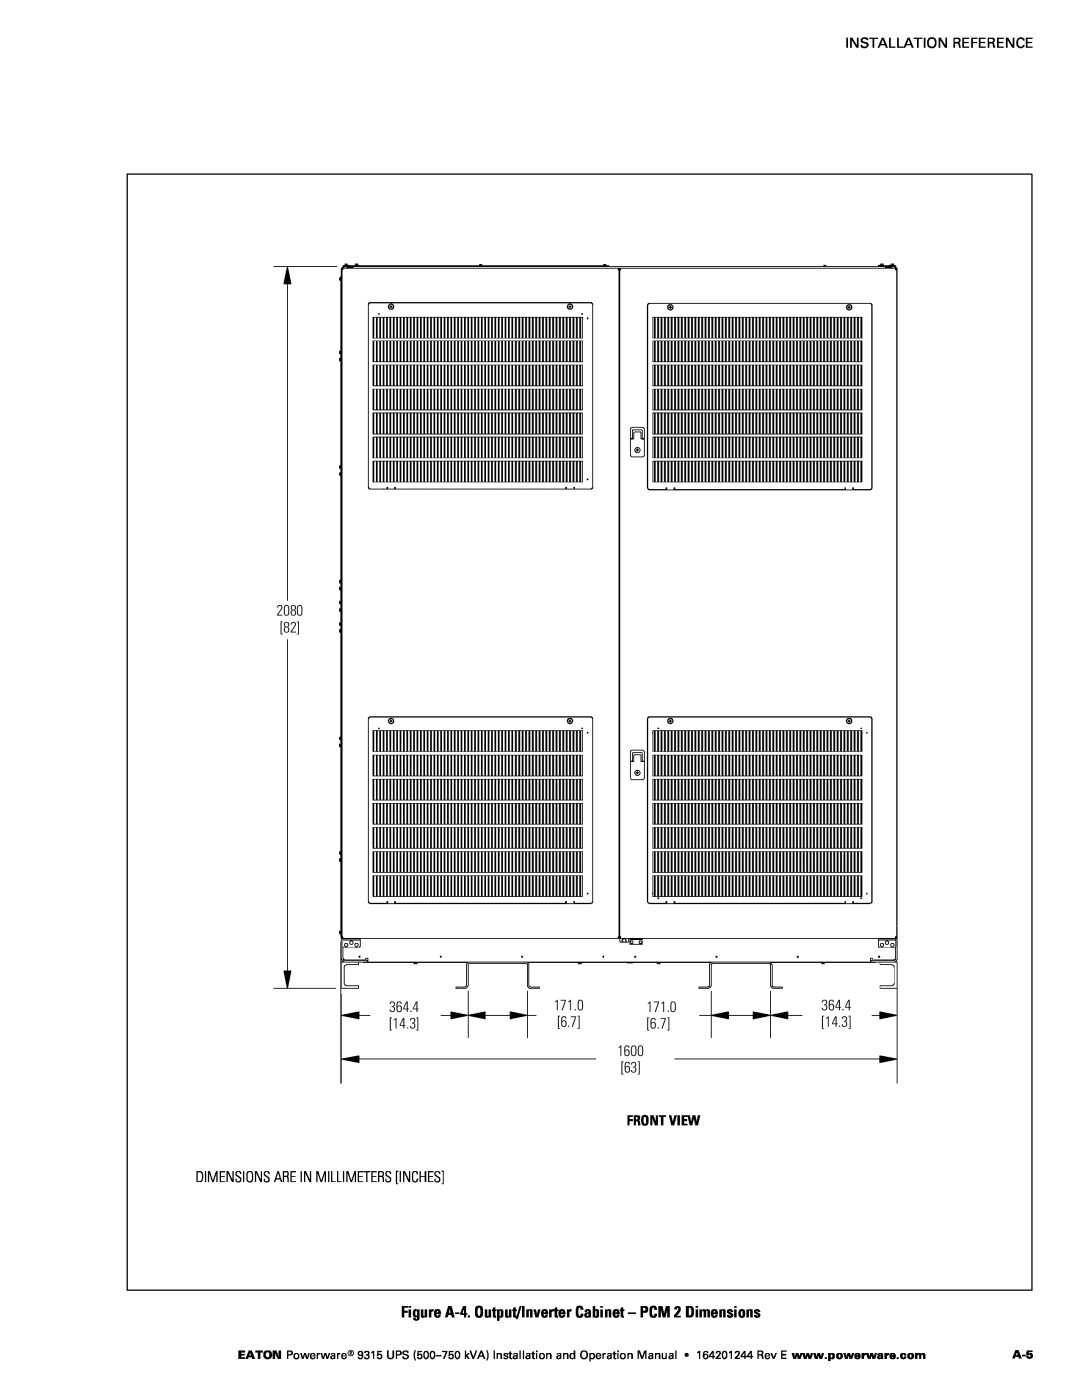 Powerware Powerware 9315 operation manual Figure A‐4. Output/Inverter Cabinet - PCM 2 Dimensions, Front View 